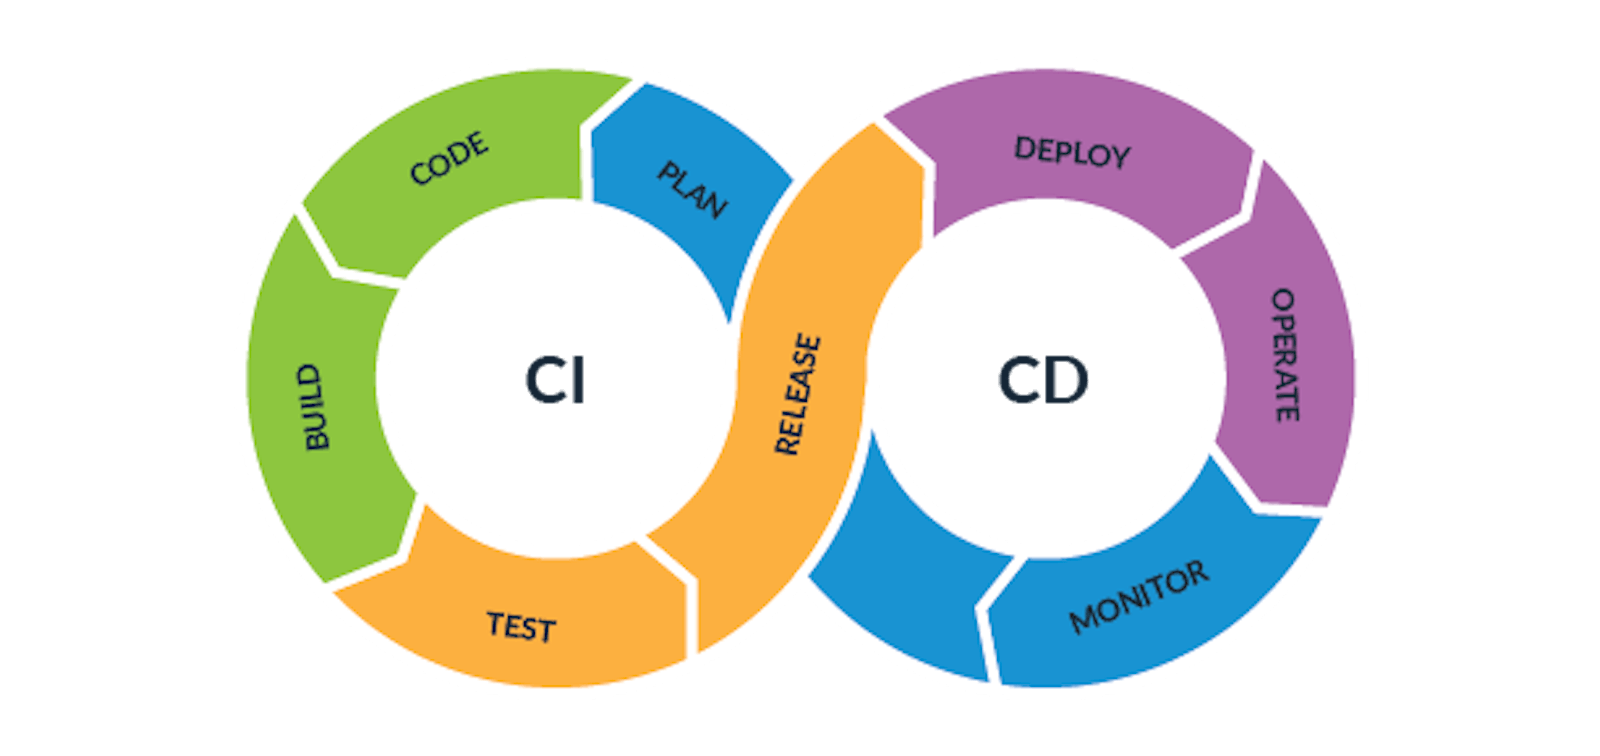 Continuous Integration and Continuous Delivery (CI/CD): An Essential Guide